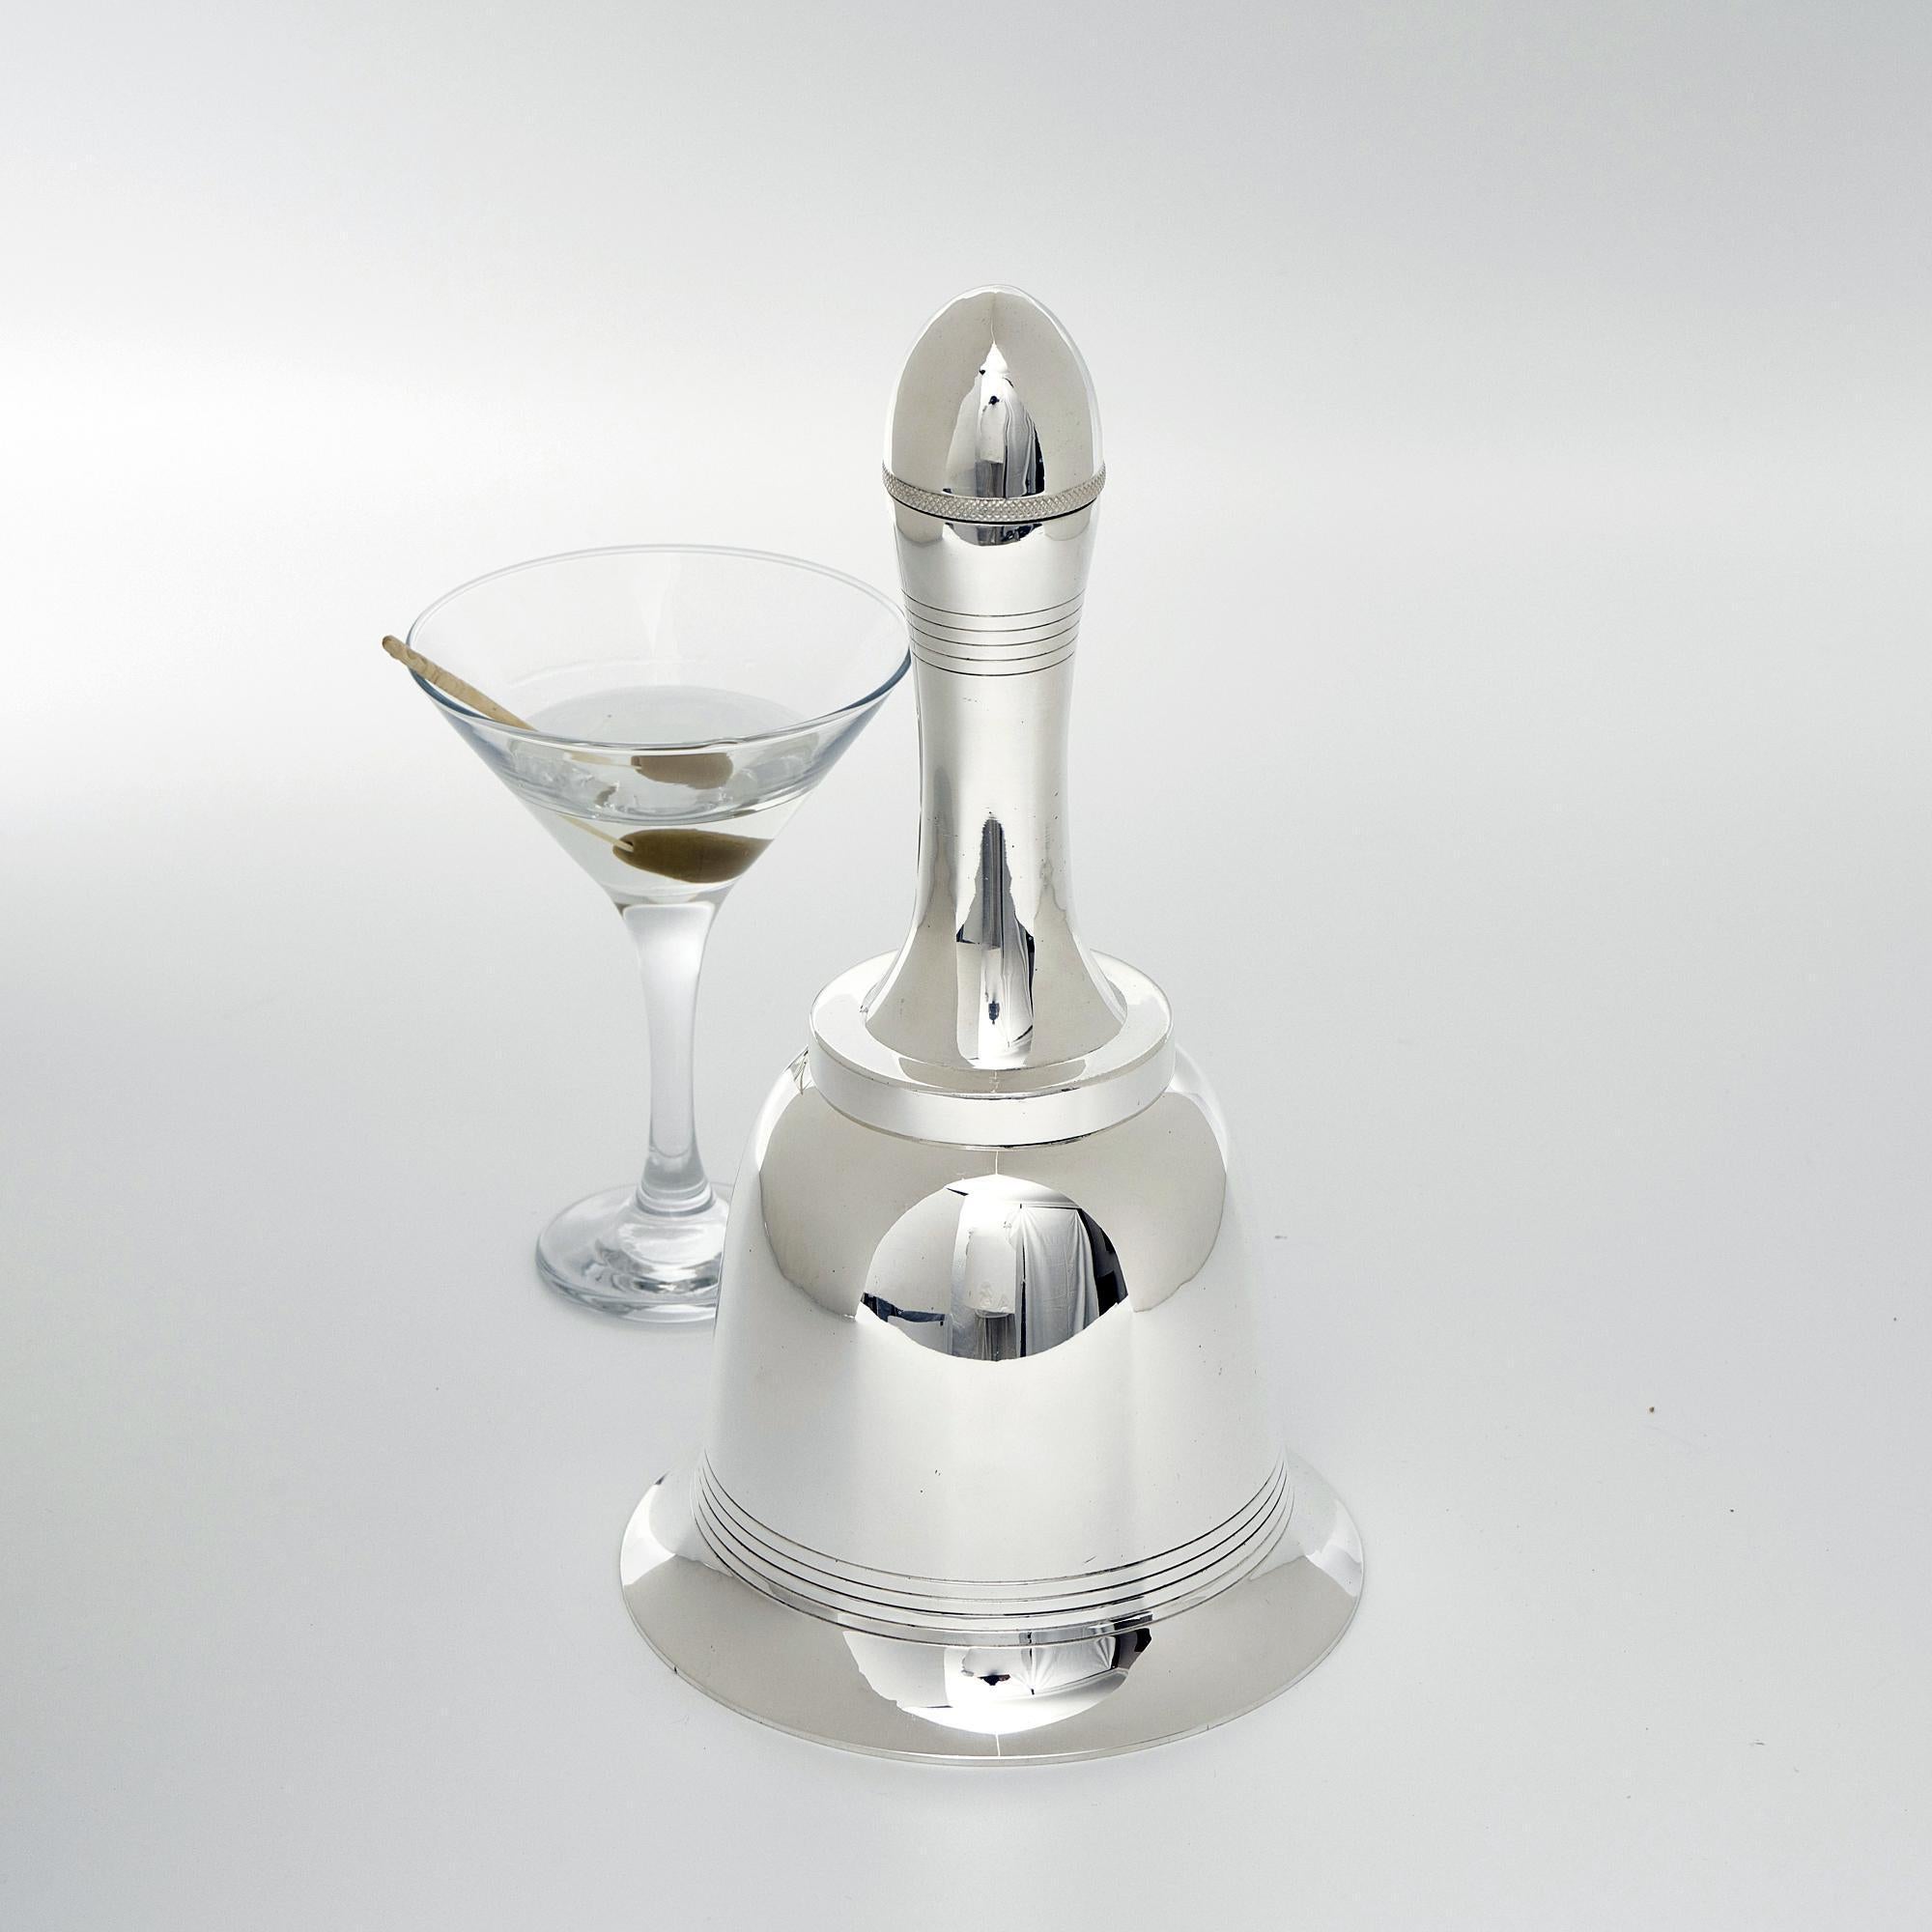 Classic 1930s silver-plated novelty cocktail shaker in the form of a hand bell, made by Asprey & Company. The upper section of the of the handle unscrews to allow pouring while the lower part of the handle unscrews for ingredients to be added. The